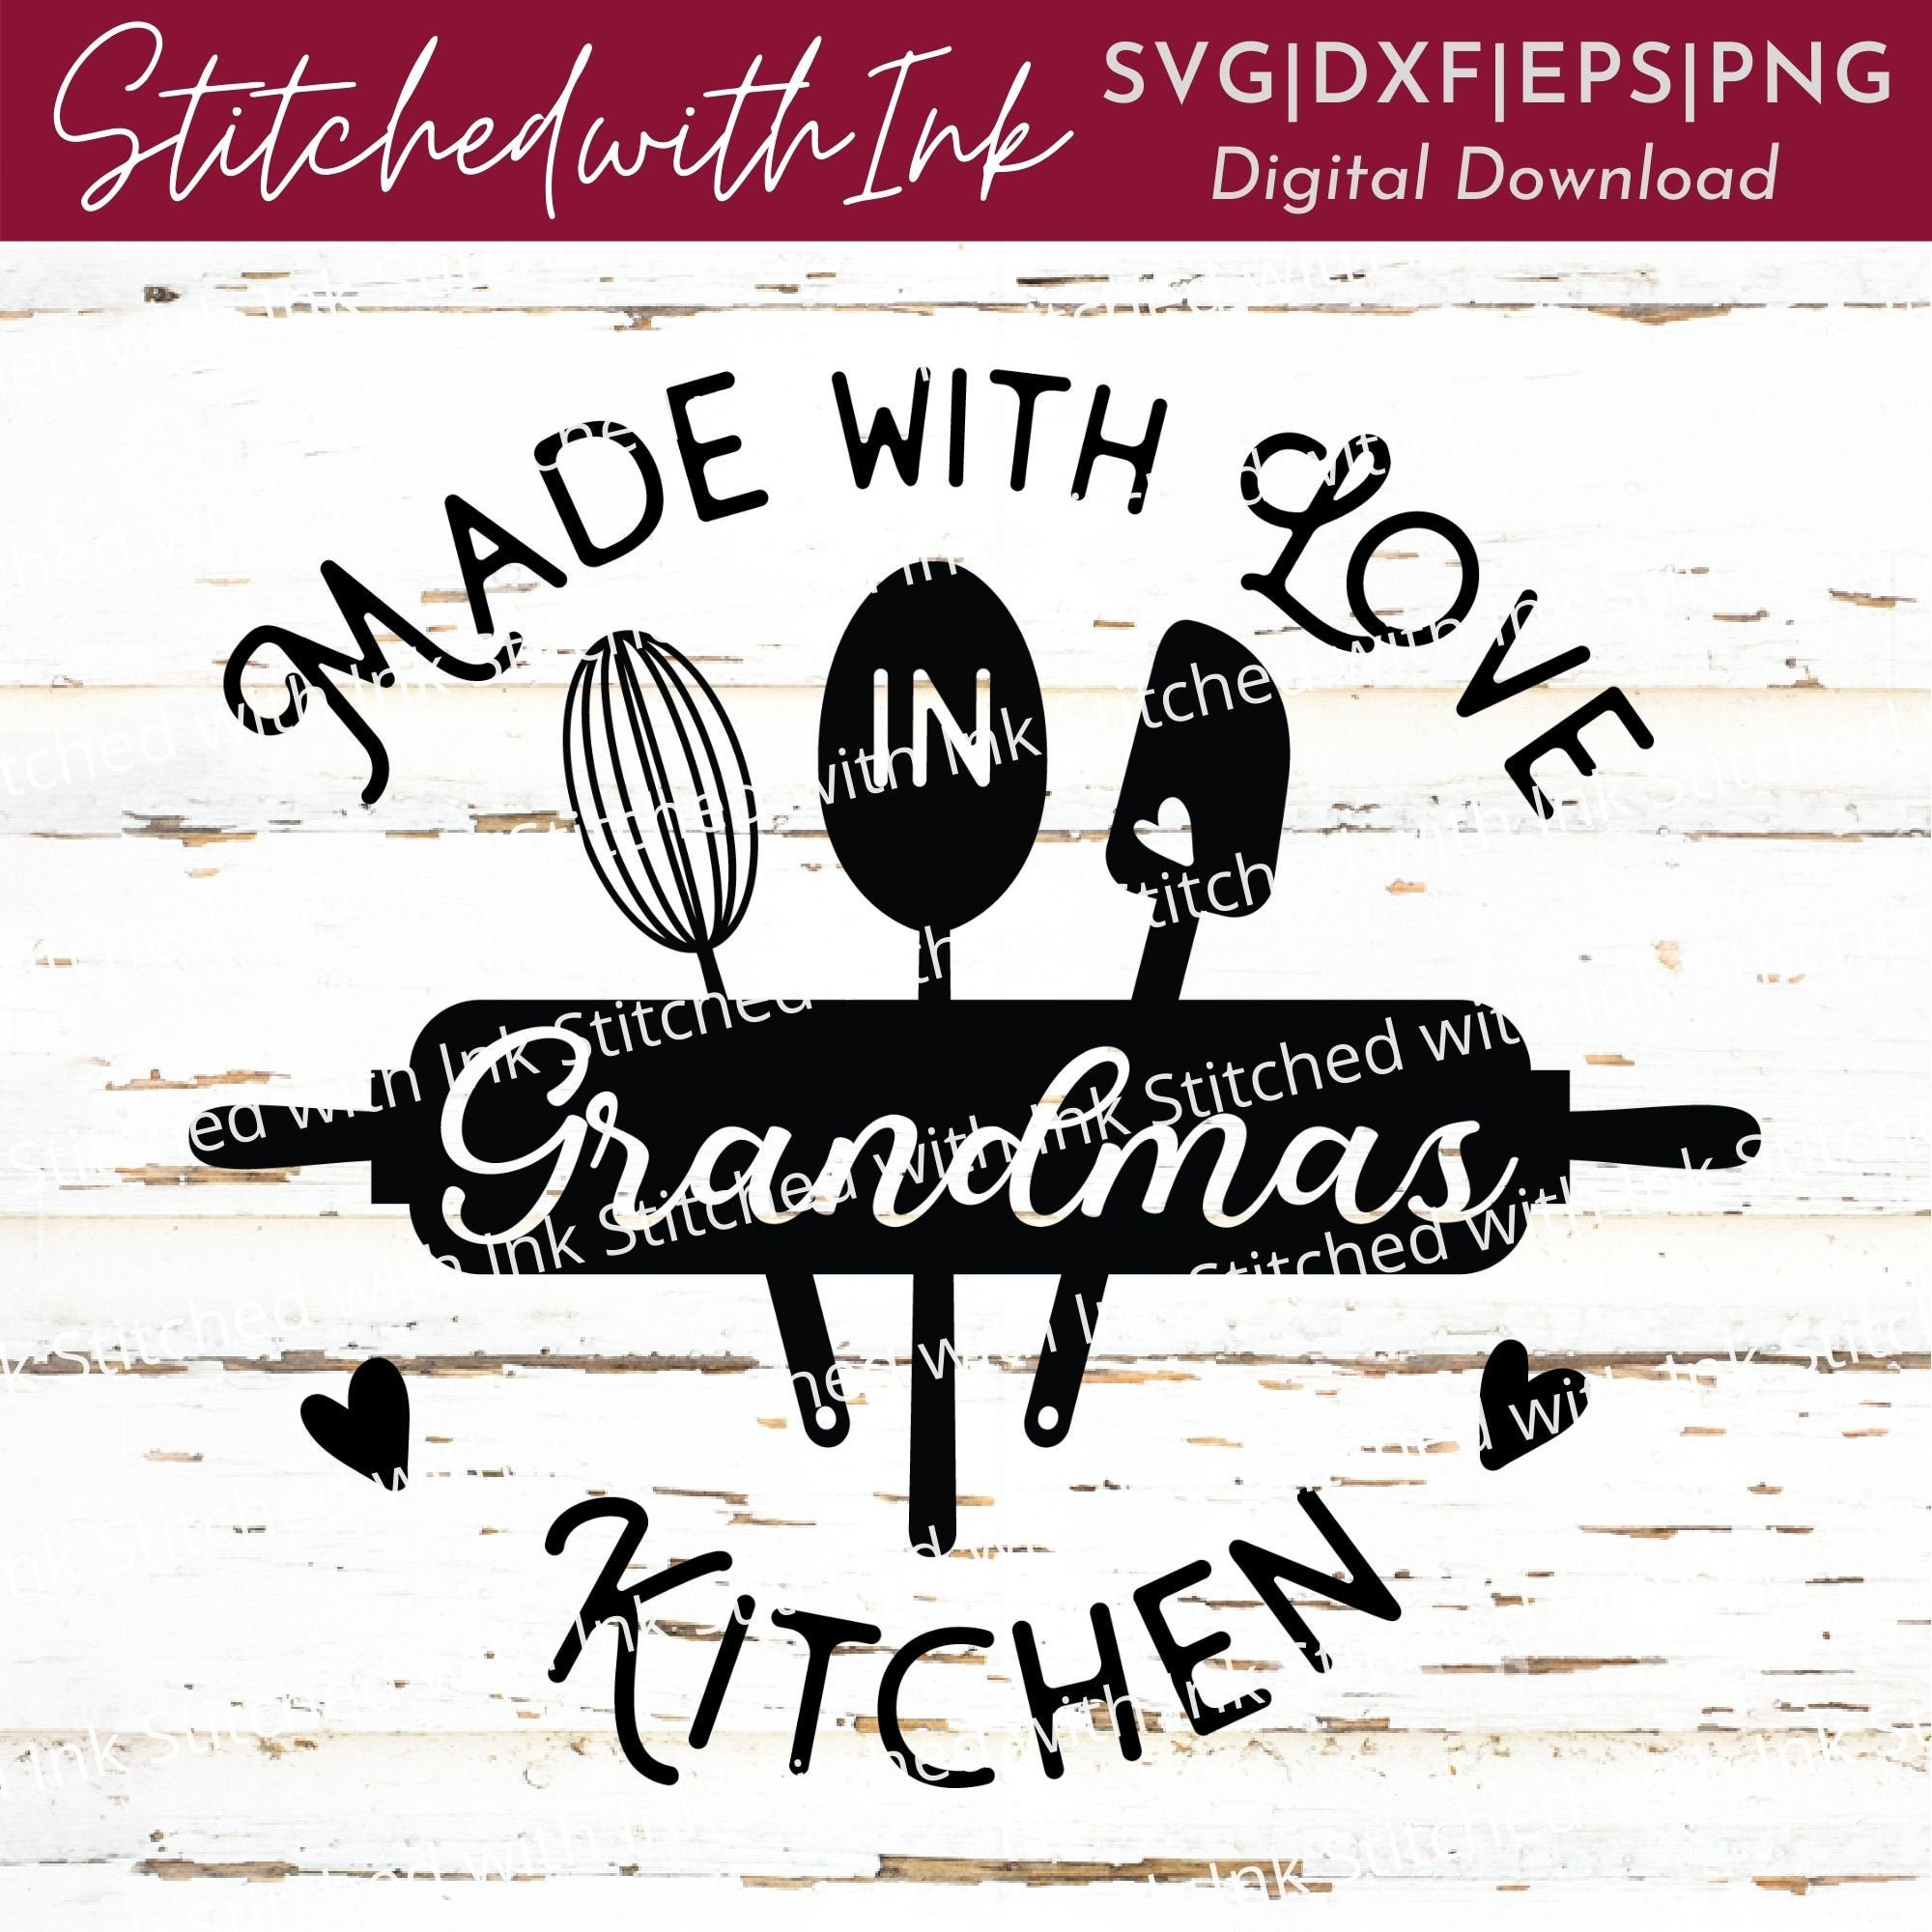 Made With Love Grandma's Kitchen - Personalized Gifts Custom Cooking C —  GearLit